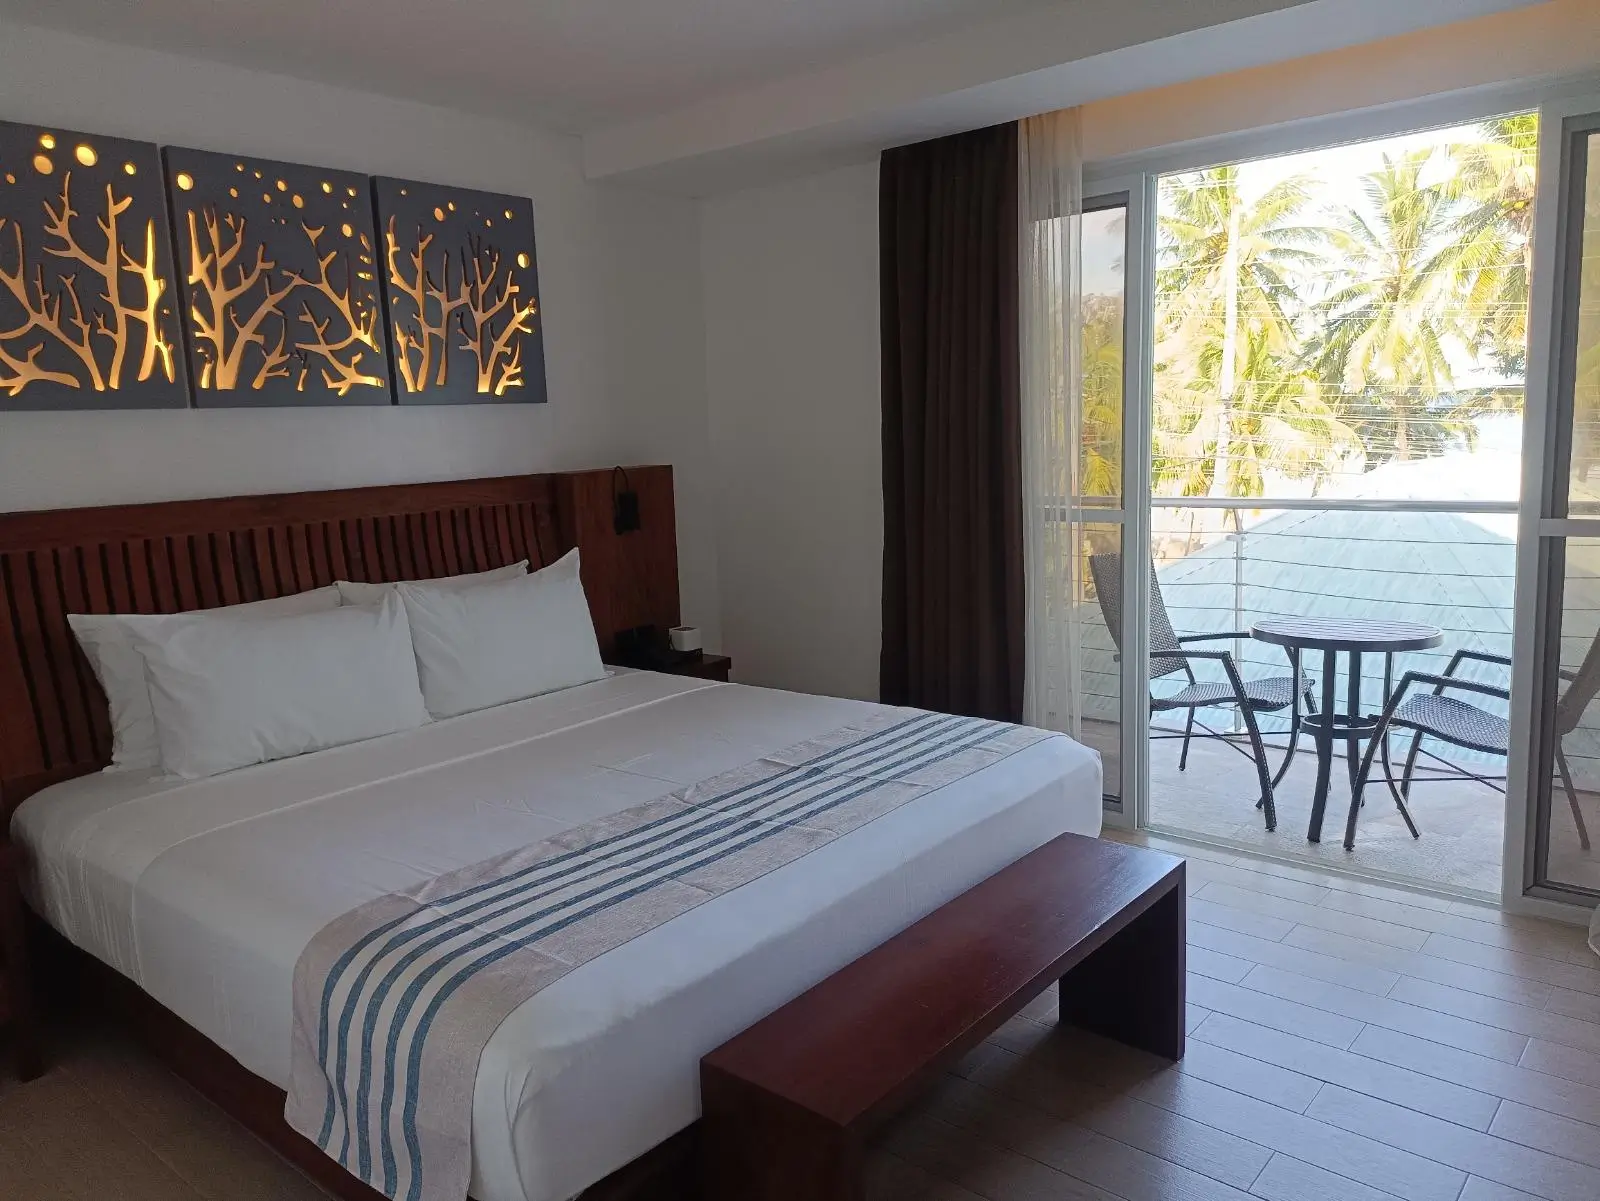 Elegant hotel room at Aira Boracay, a boutique resort in Boracay, with a spacious bed, wood-accented decor, and sliding glass doors that open to a balcony with a view of palm trees.